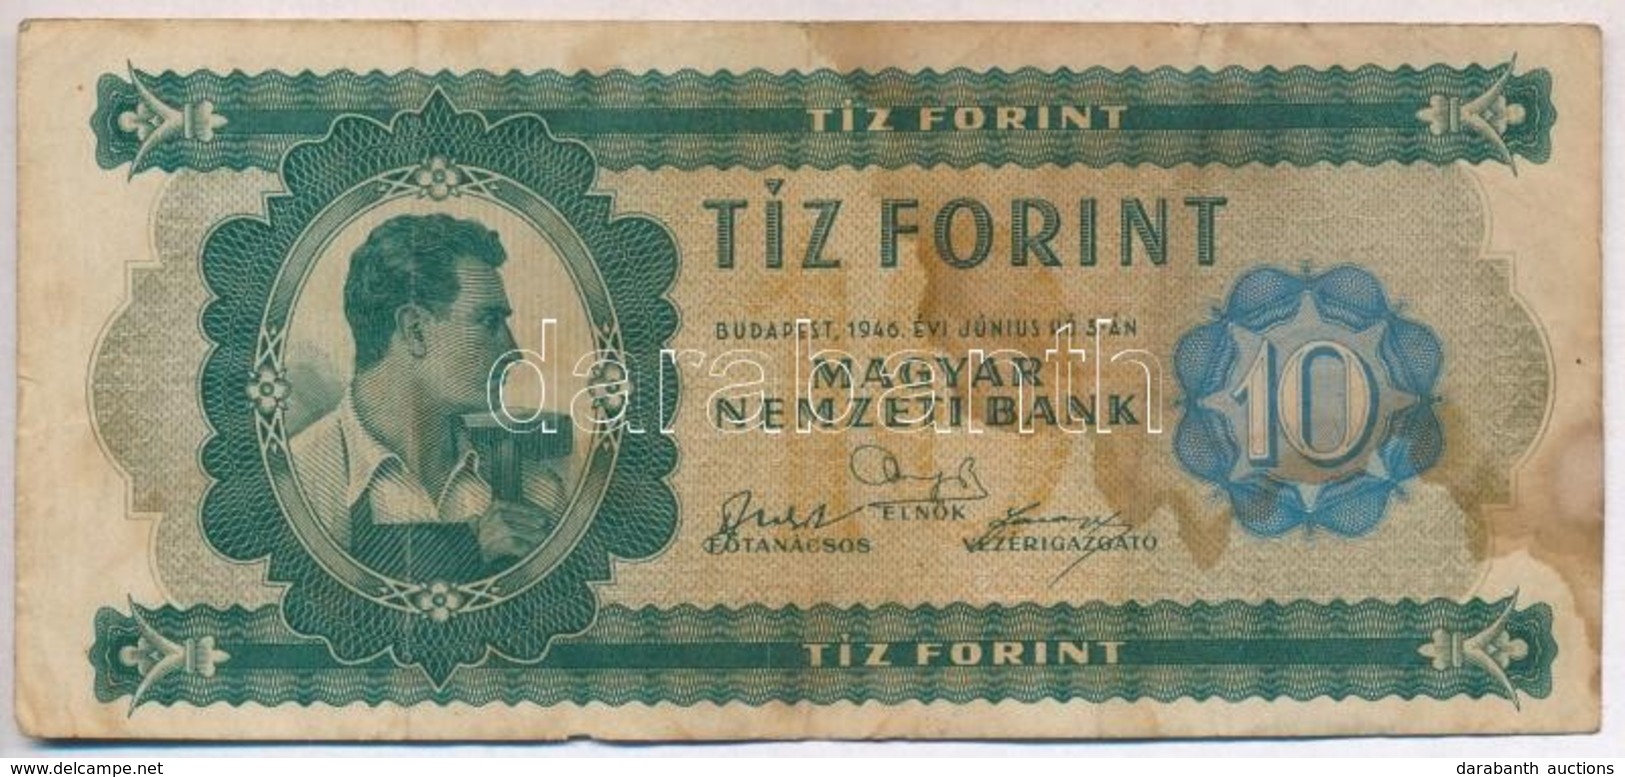 1946. 10Ft T:III,III- Fo.
Hungary 1946. 10 Forint C:F,VG Spotted
Adamo F1 - Ohne Zuordnung